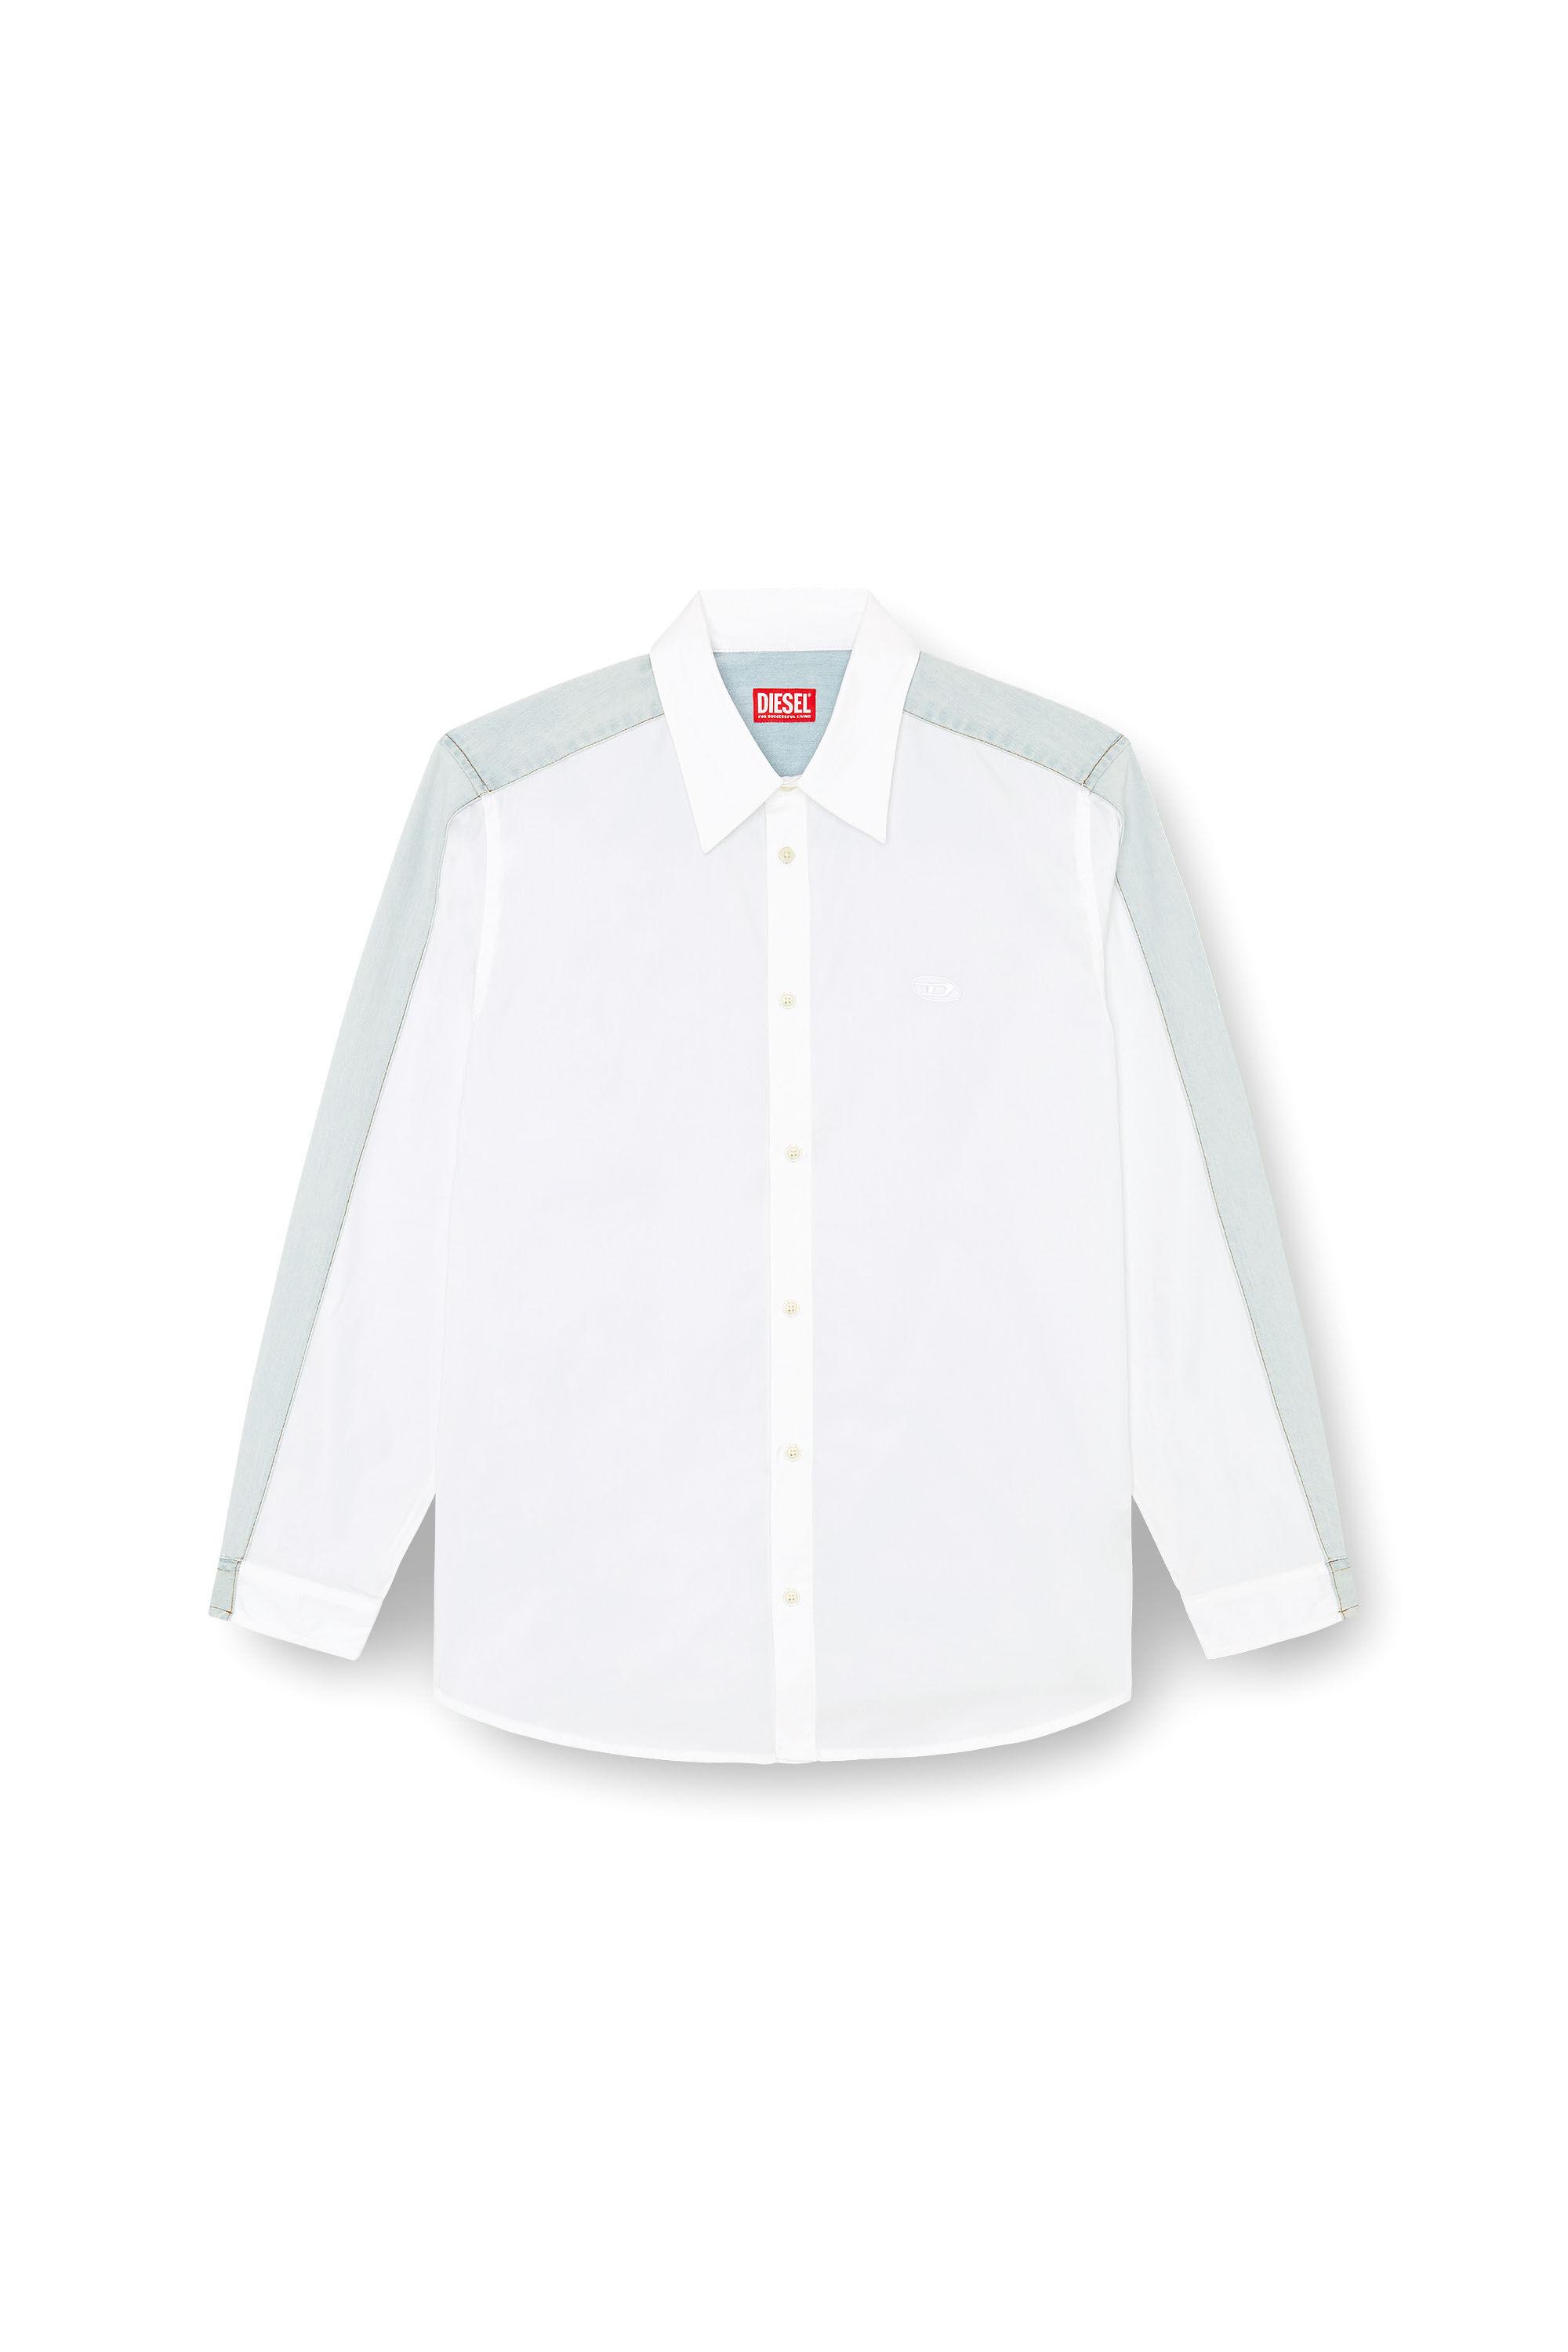 Diesel - S-SIMPLY-DNM, Man Shirt in cotton poplin and denim in Multicolor - Image 2